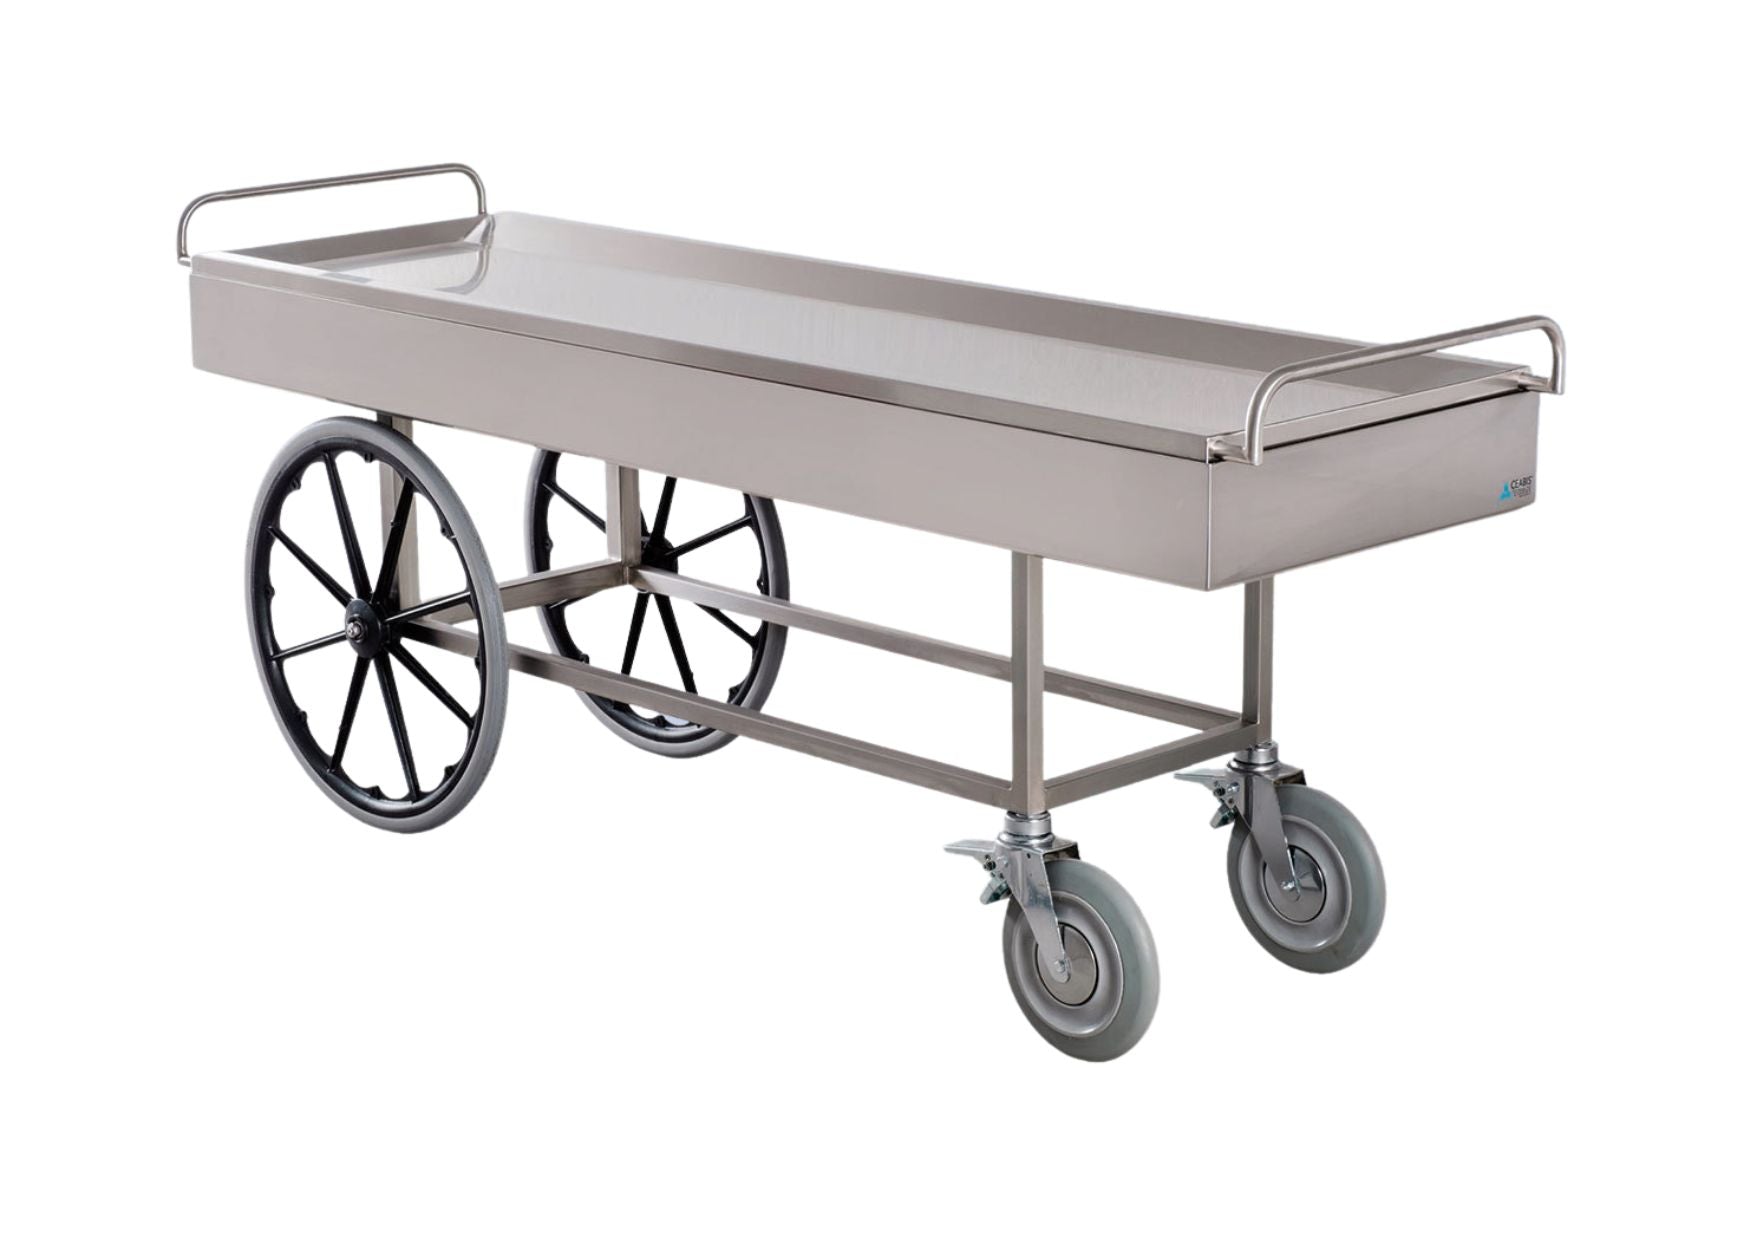 Stainless steel transport trolley for outdoor use